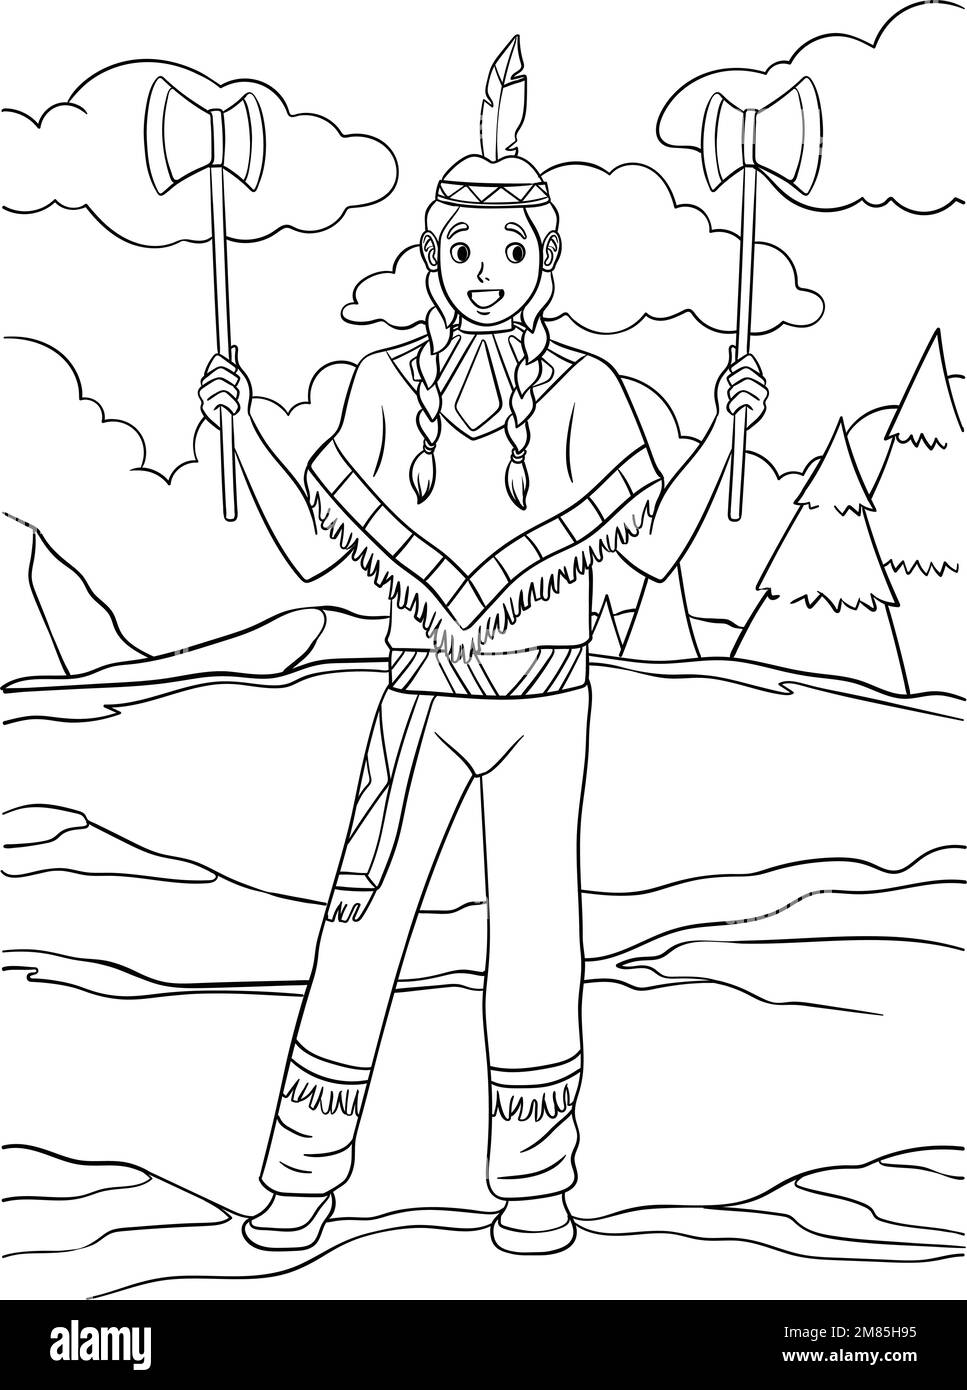 Native American Indian With Tomahawk Coloring Page Stock Vector